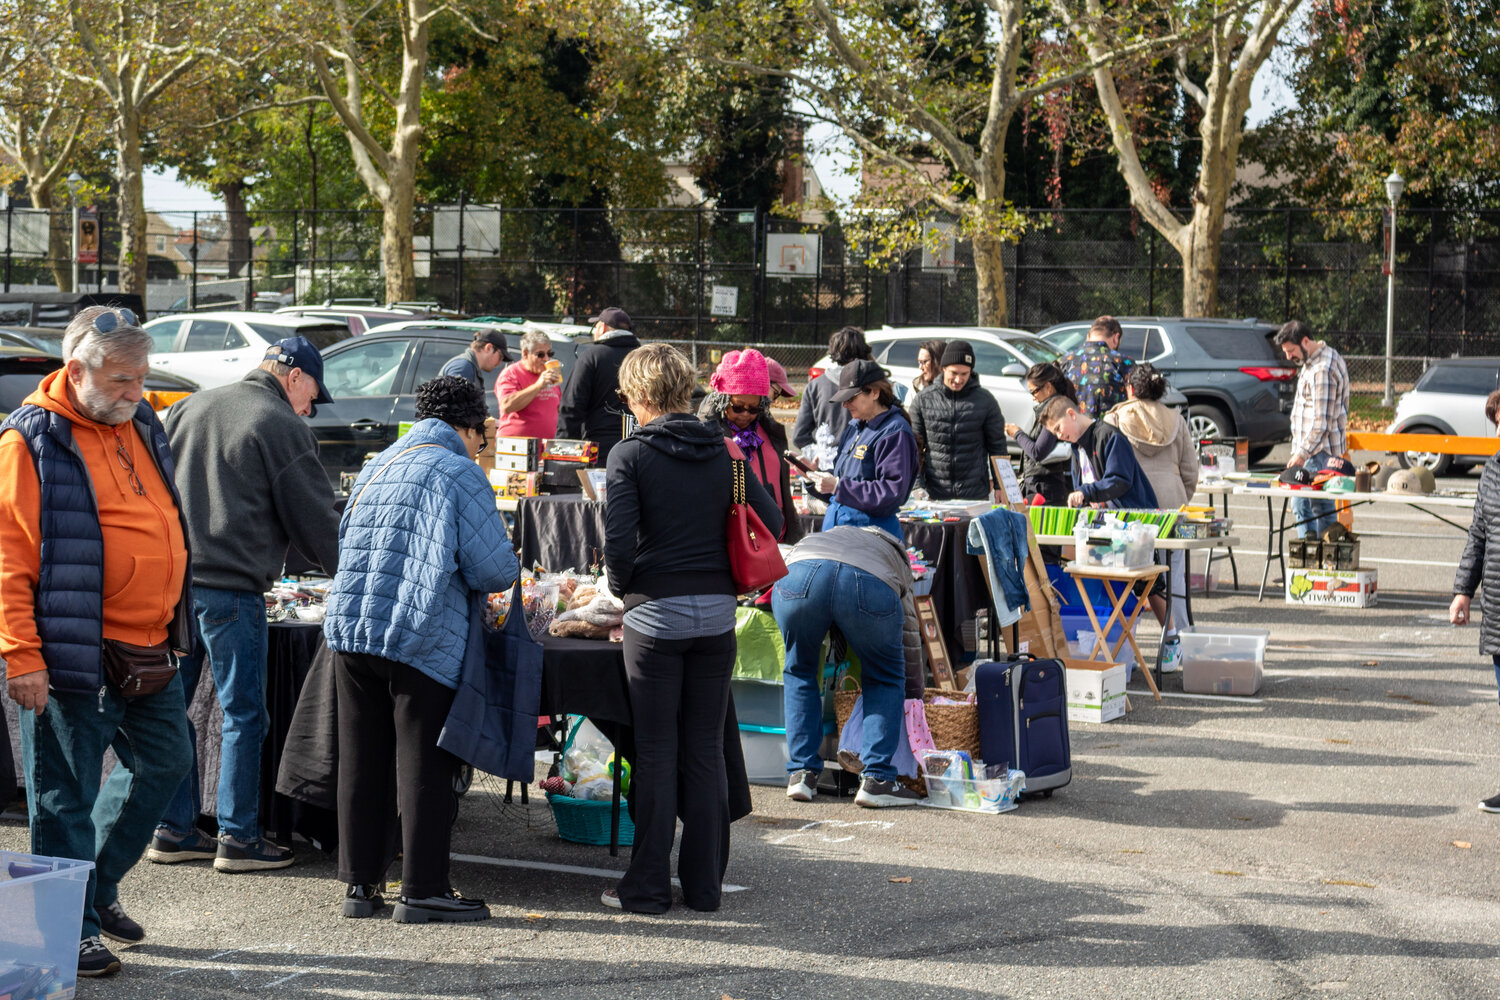 Residents showed up to browse the community yard sale in Franklin Square last weekend.